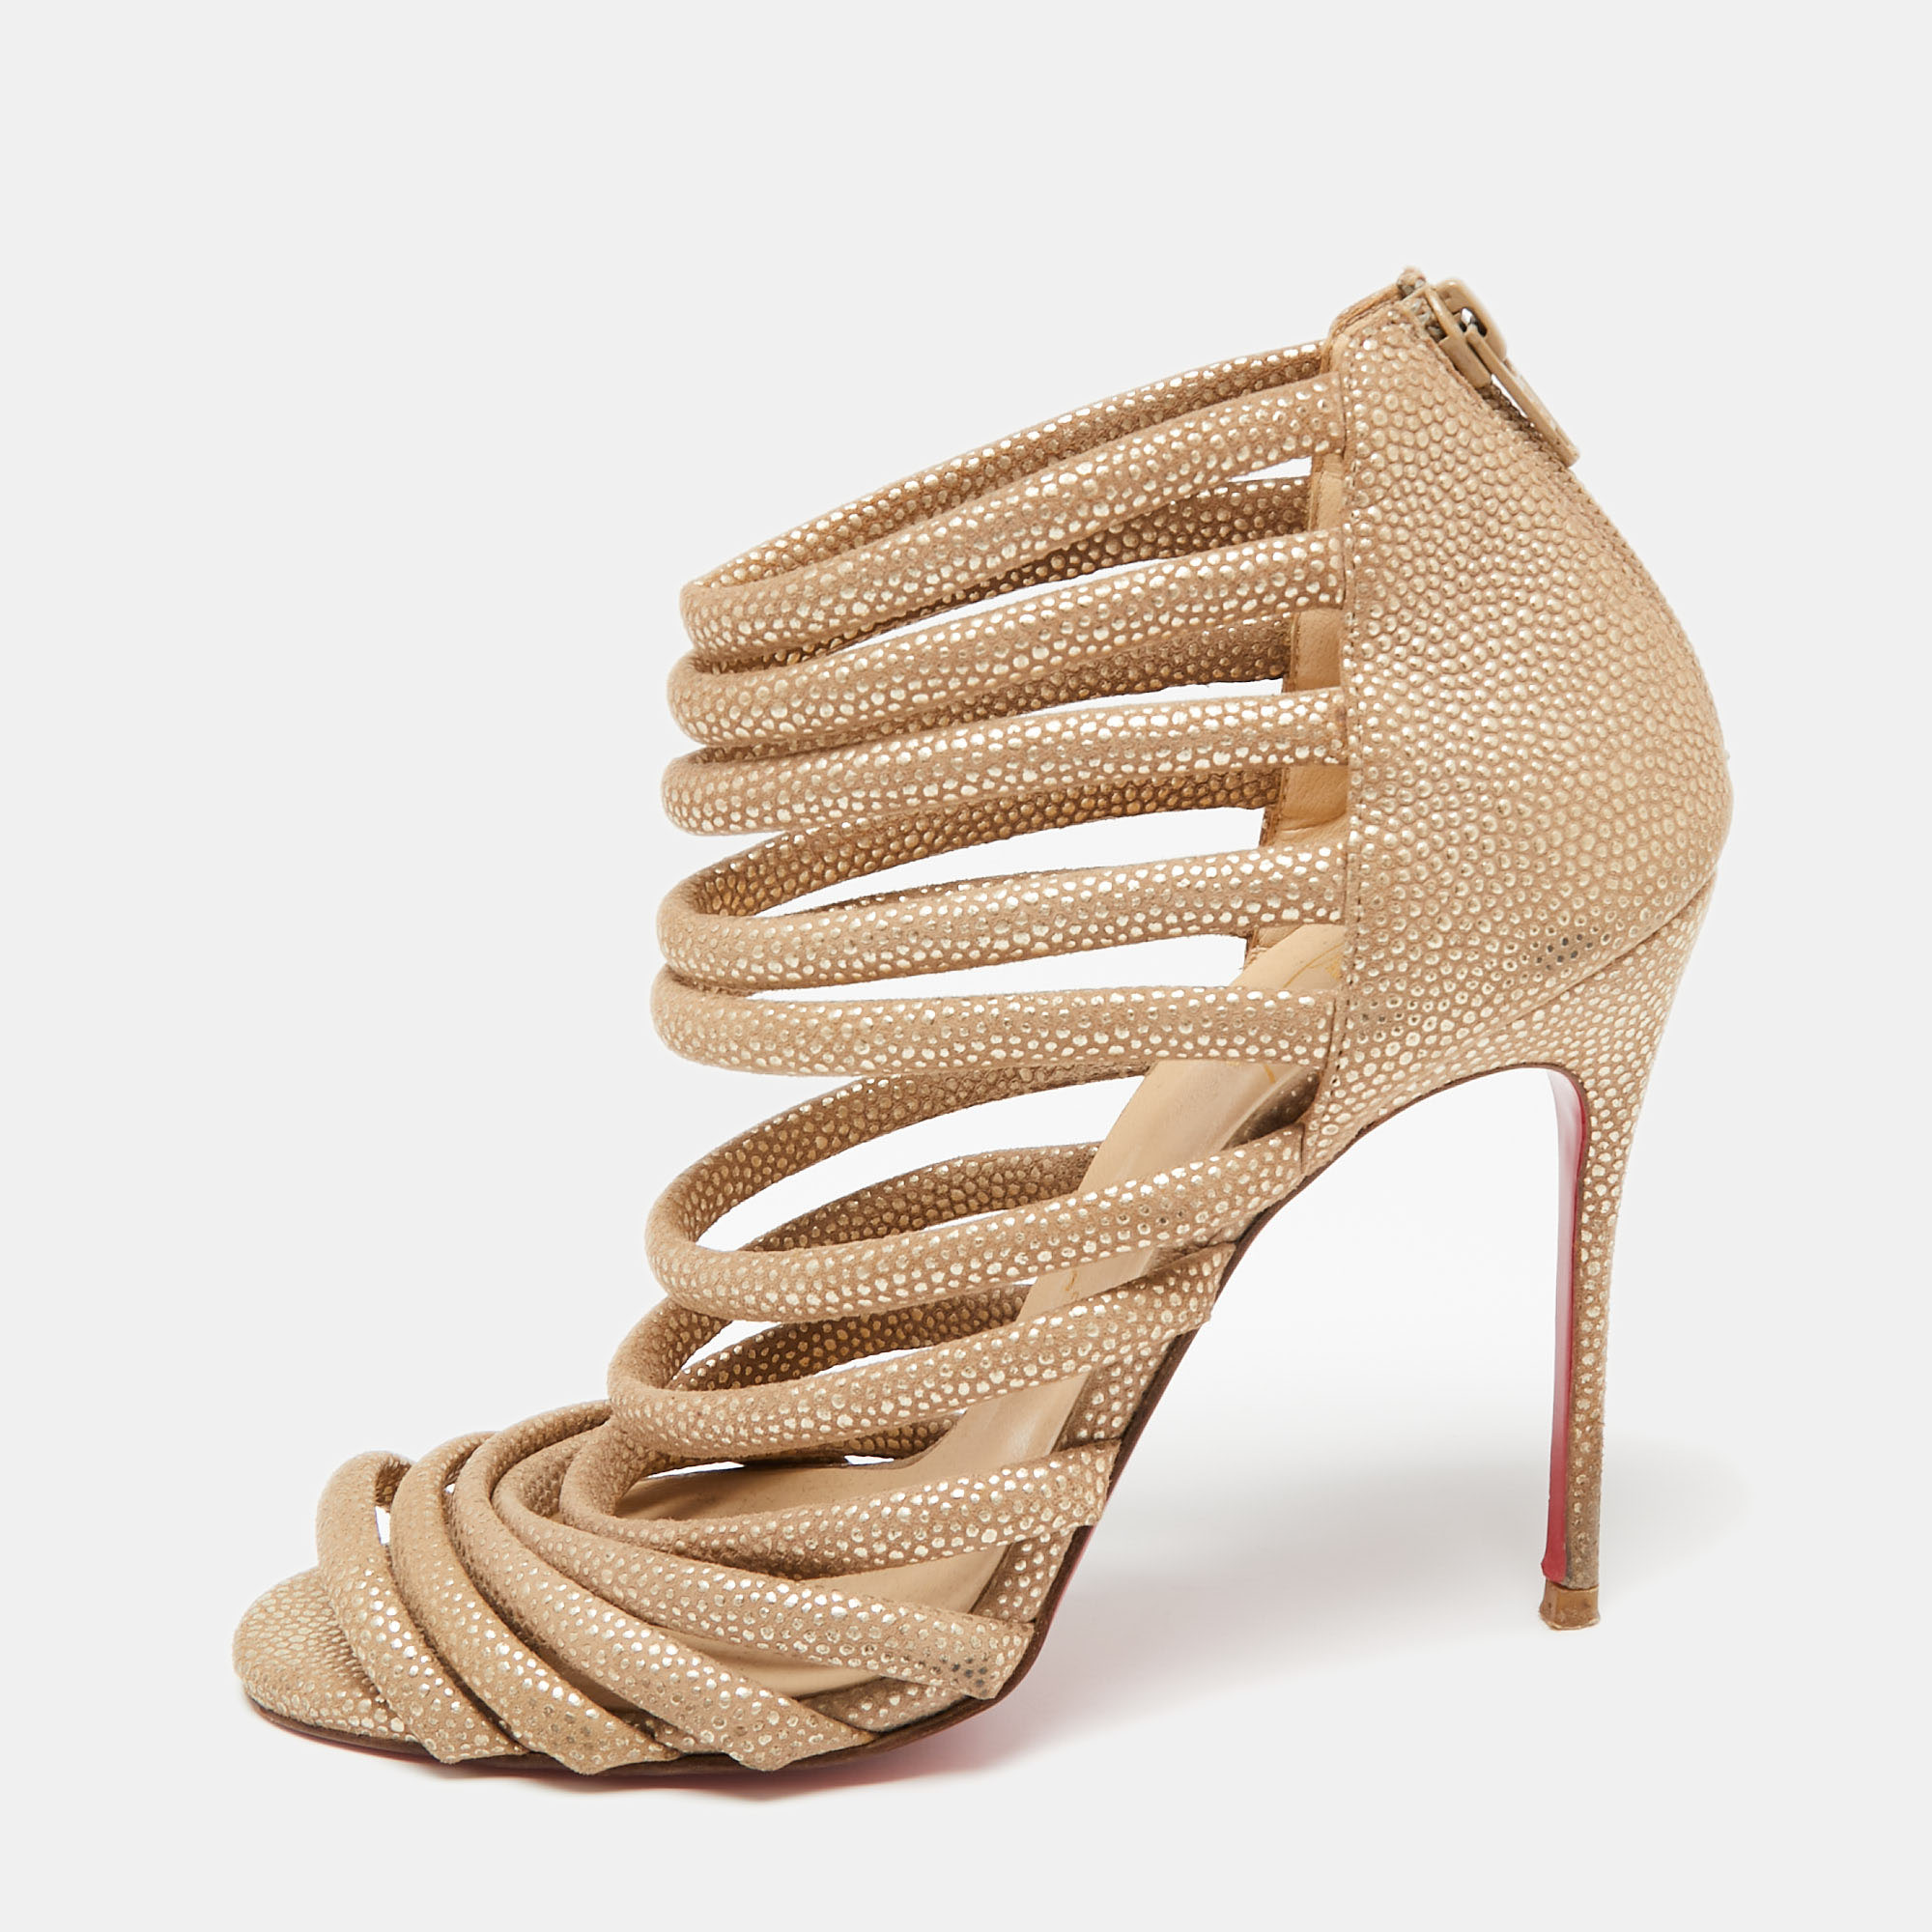 Christian louboutin gold/brown textured suede open-toe strappy sandals size 37